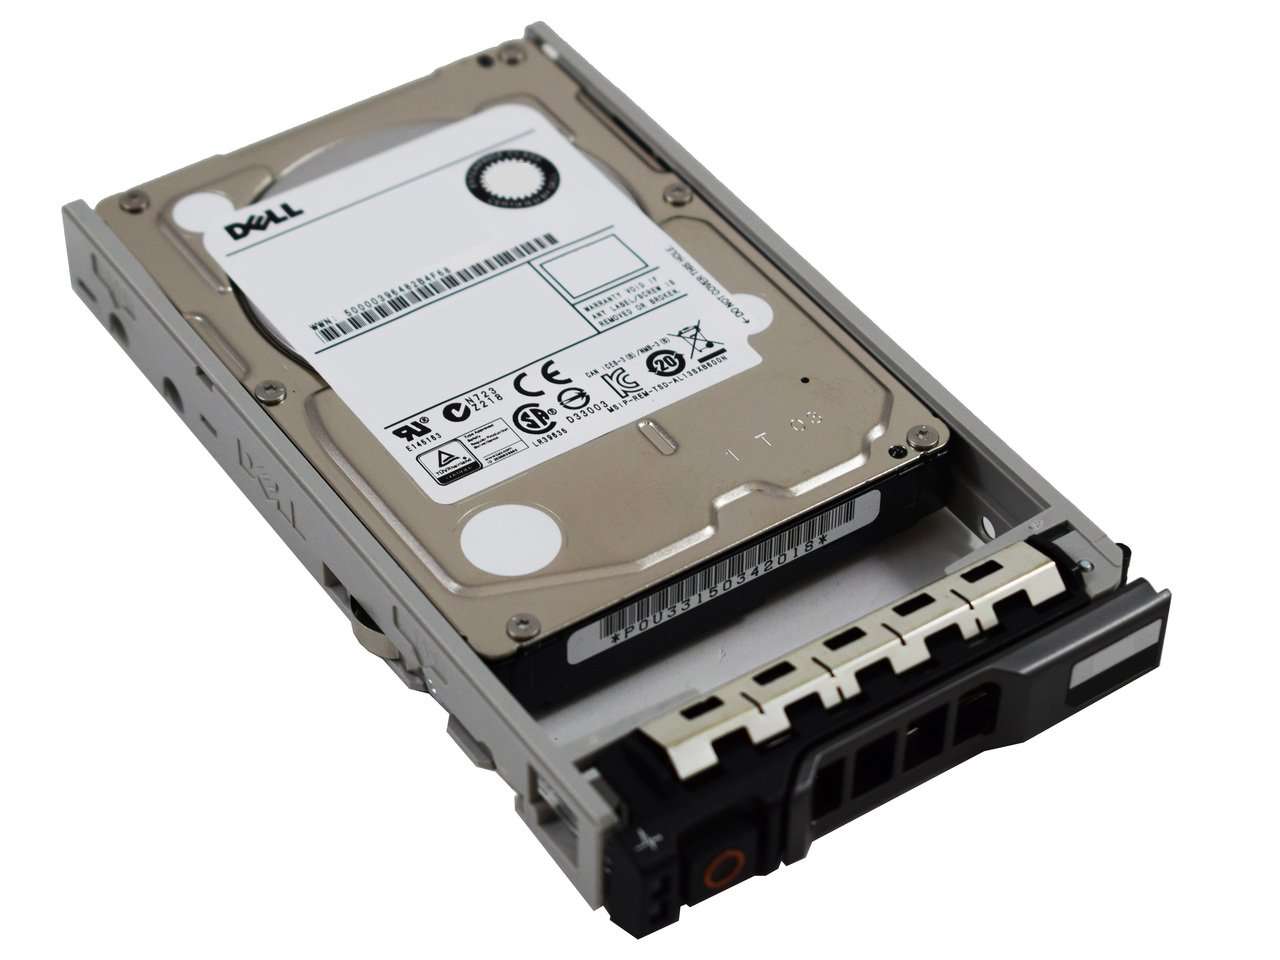 Dell G13 33DP0 600GB 15K RPM SAS 6Gb/s 512n 2.5" Manufacturer Recertified HDD